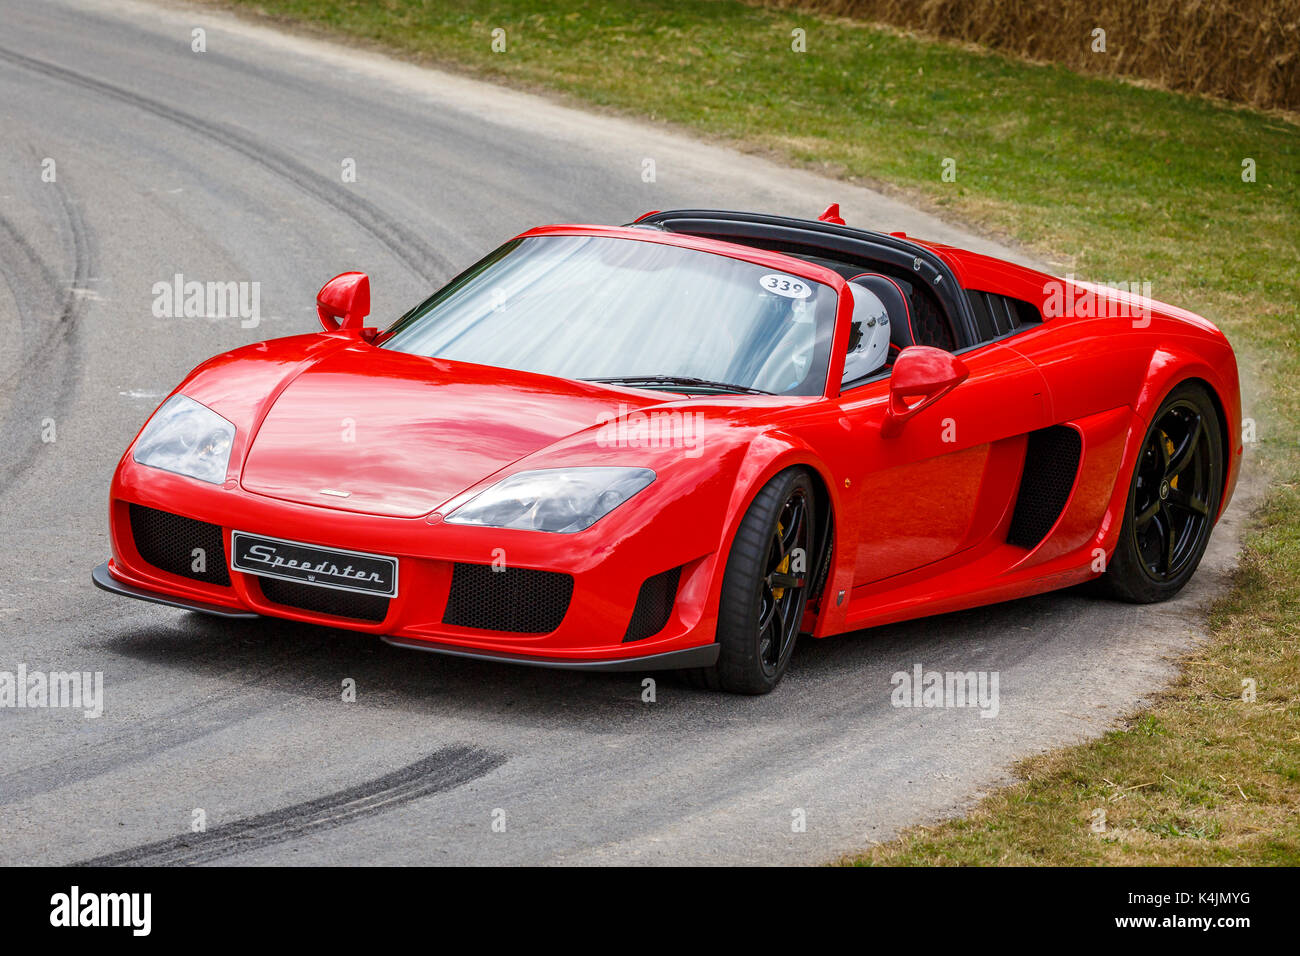 17 Noble M600 Speedster At The 17 Goodwood Festival Of Speed Stock Photo Alamy